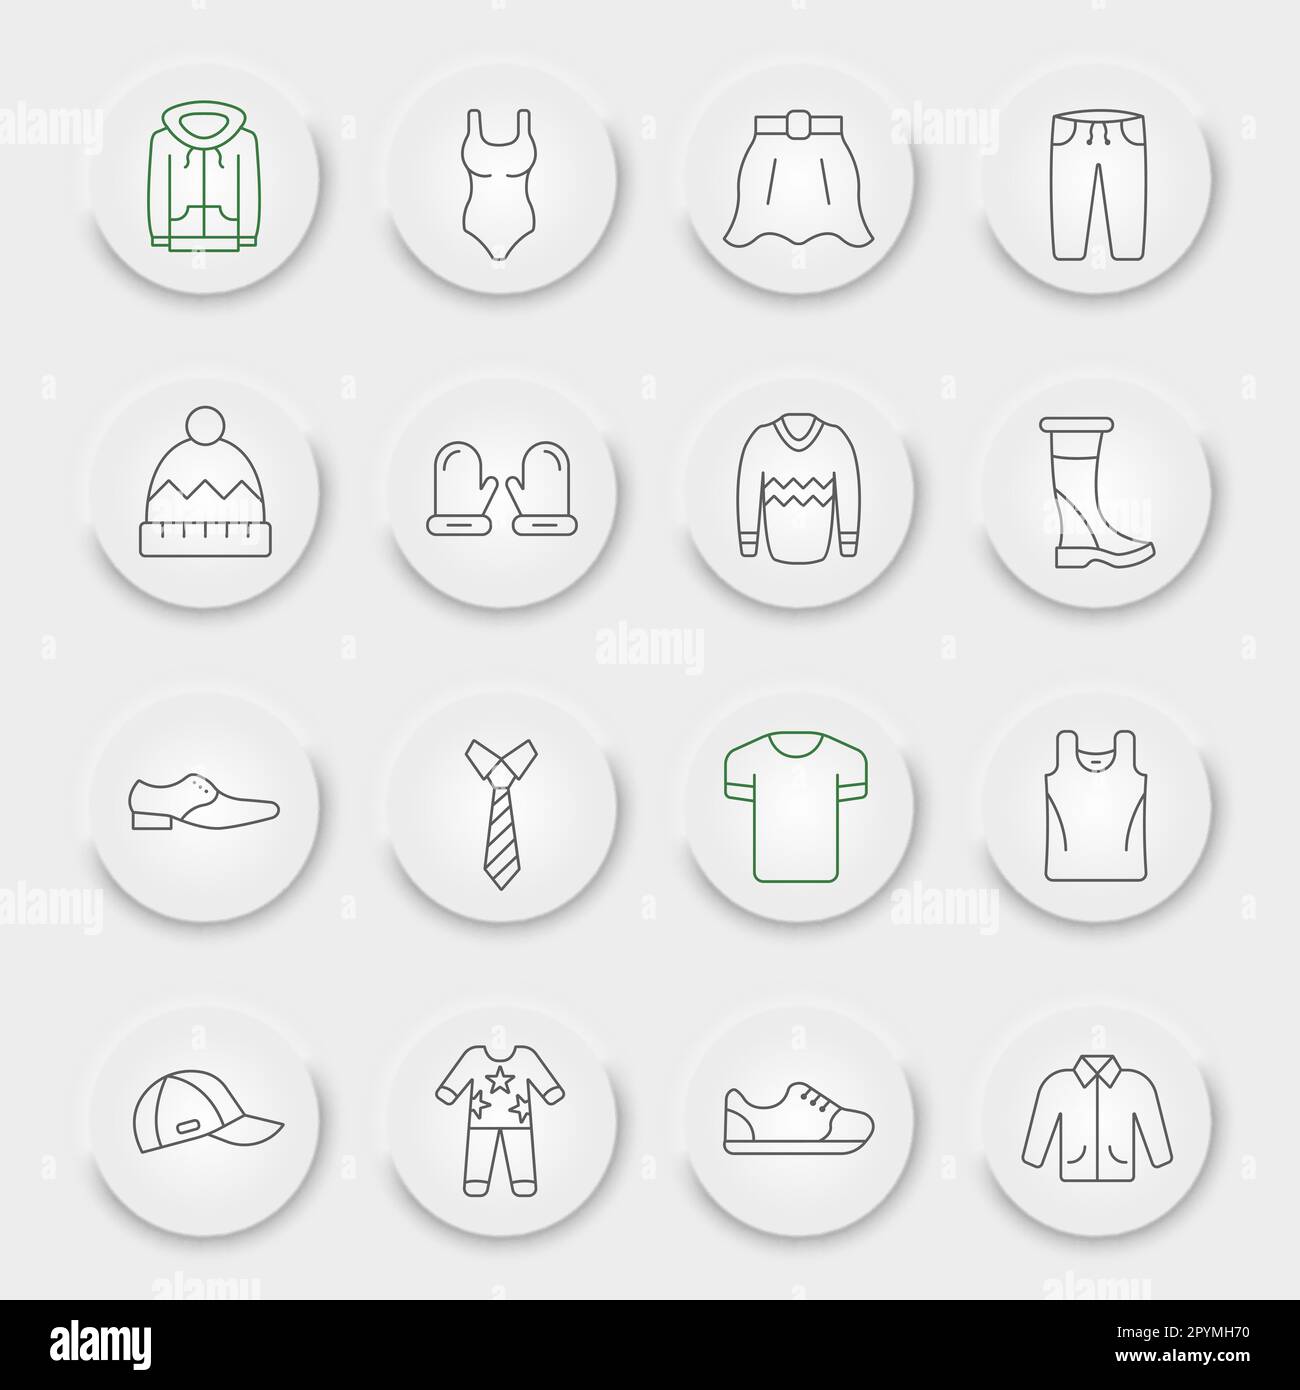 Clothes line icon set, clothing symbols collection, vector sketches ...